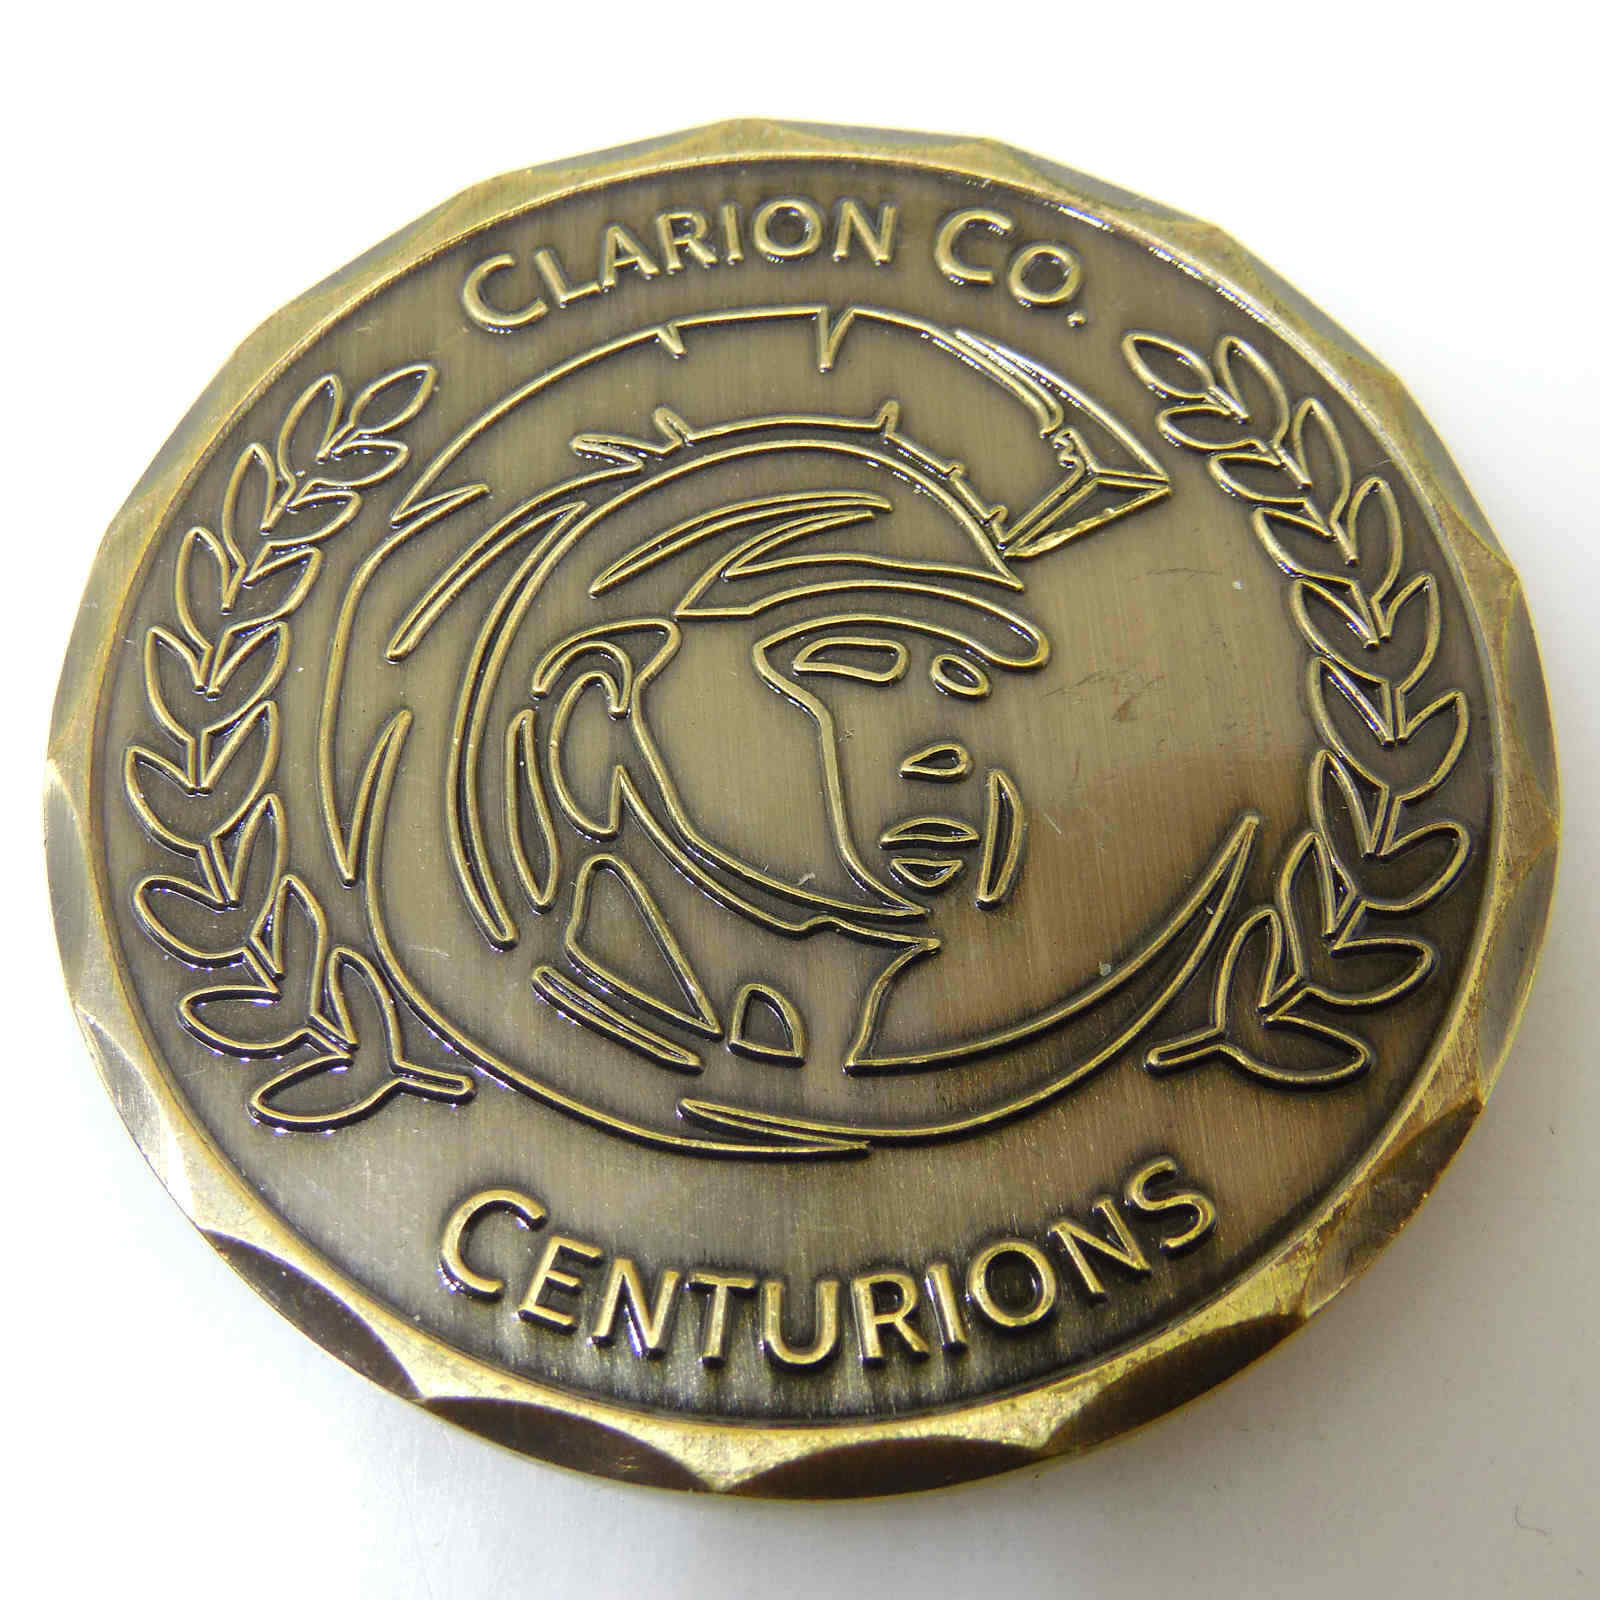 CLARION CO CENTURIONS KEEP CALM AND CENTURI ON CHALLENGE COIN